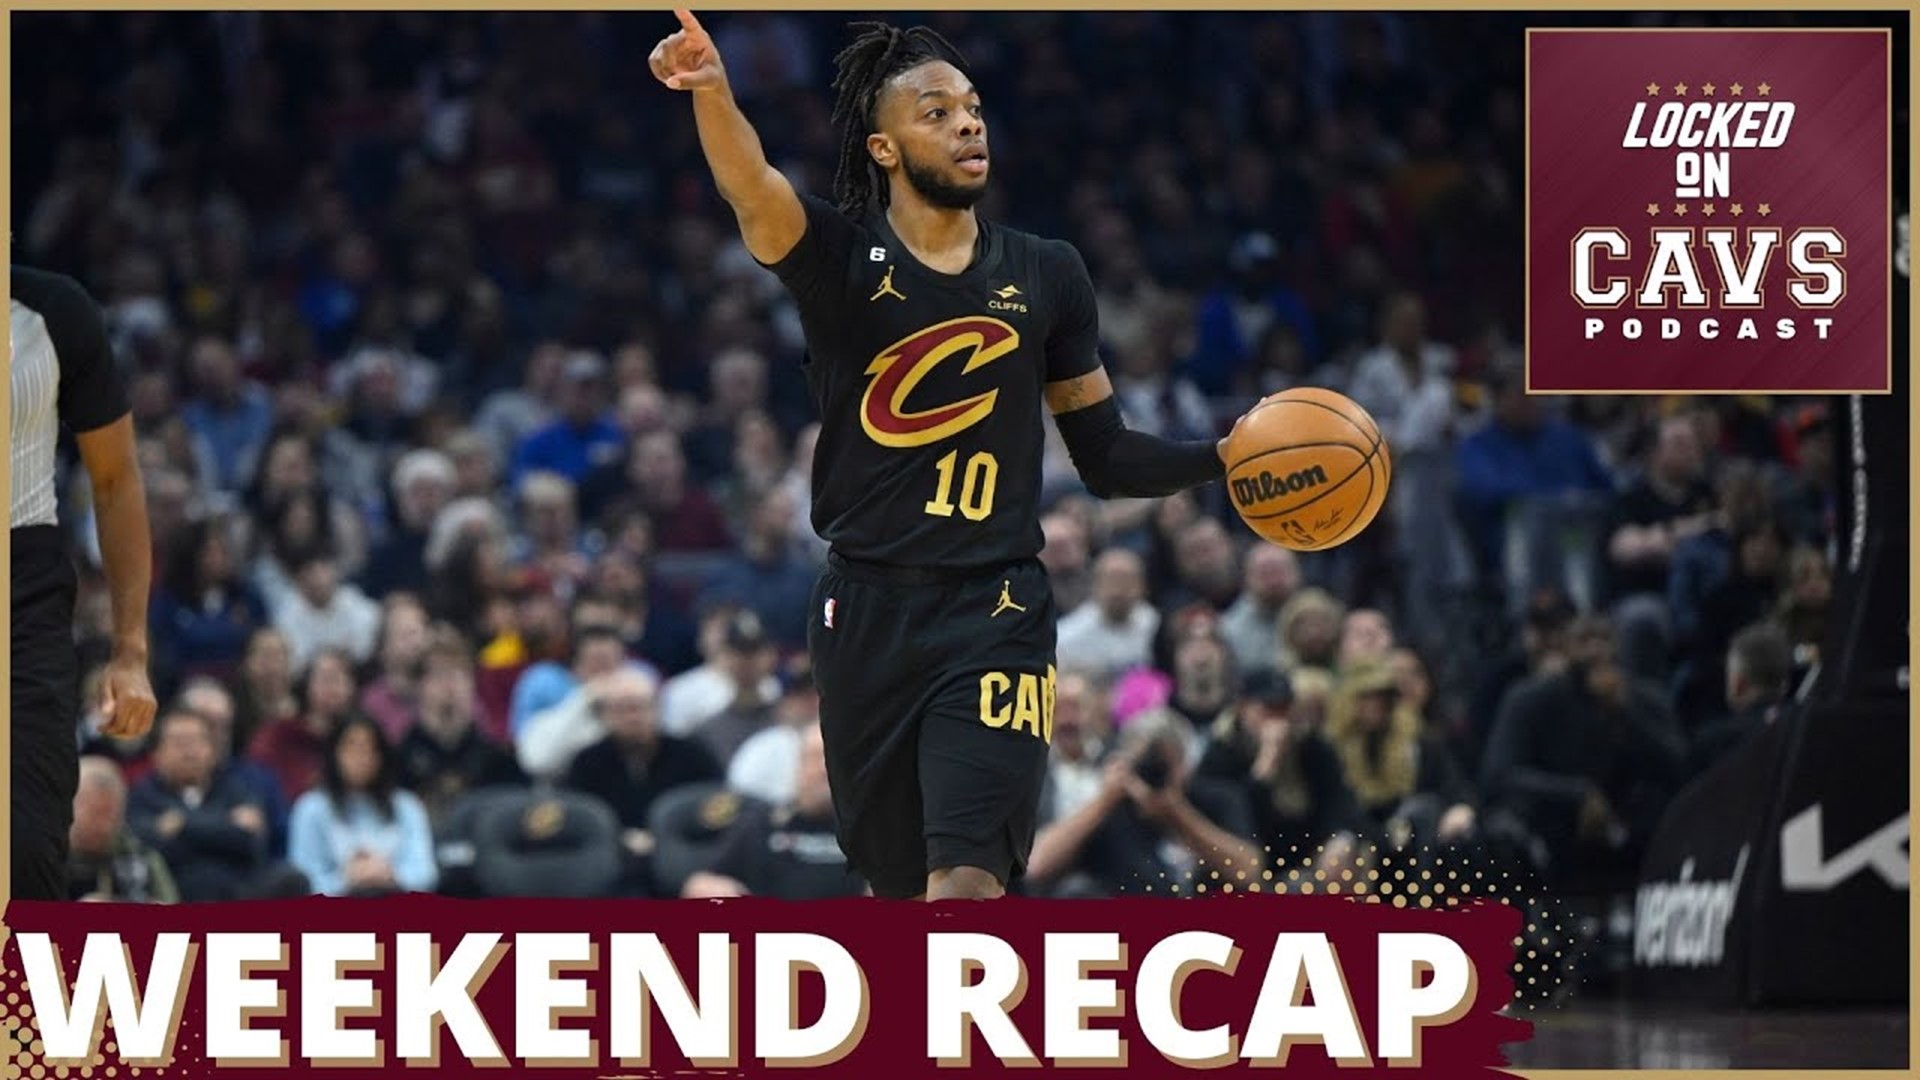 Chris Manning and Evan Dammarell take a closer look at the latest round of Cavs games and where the team stands right now.